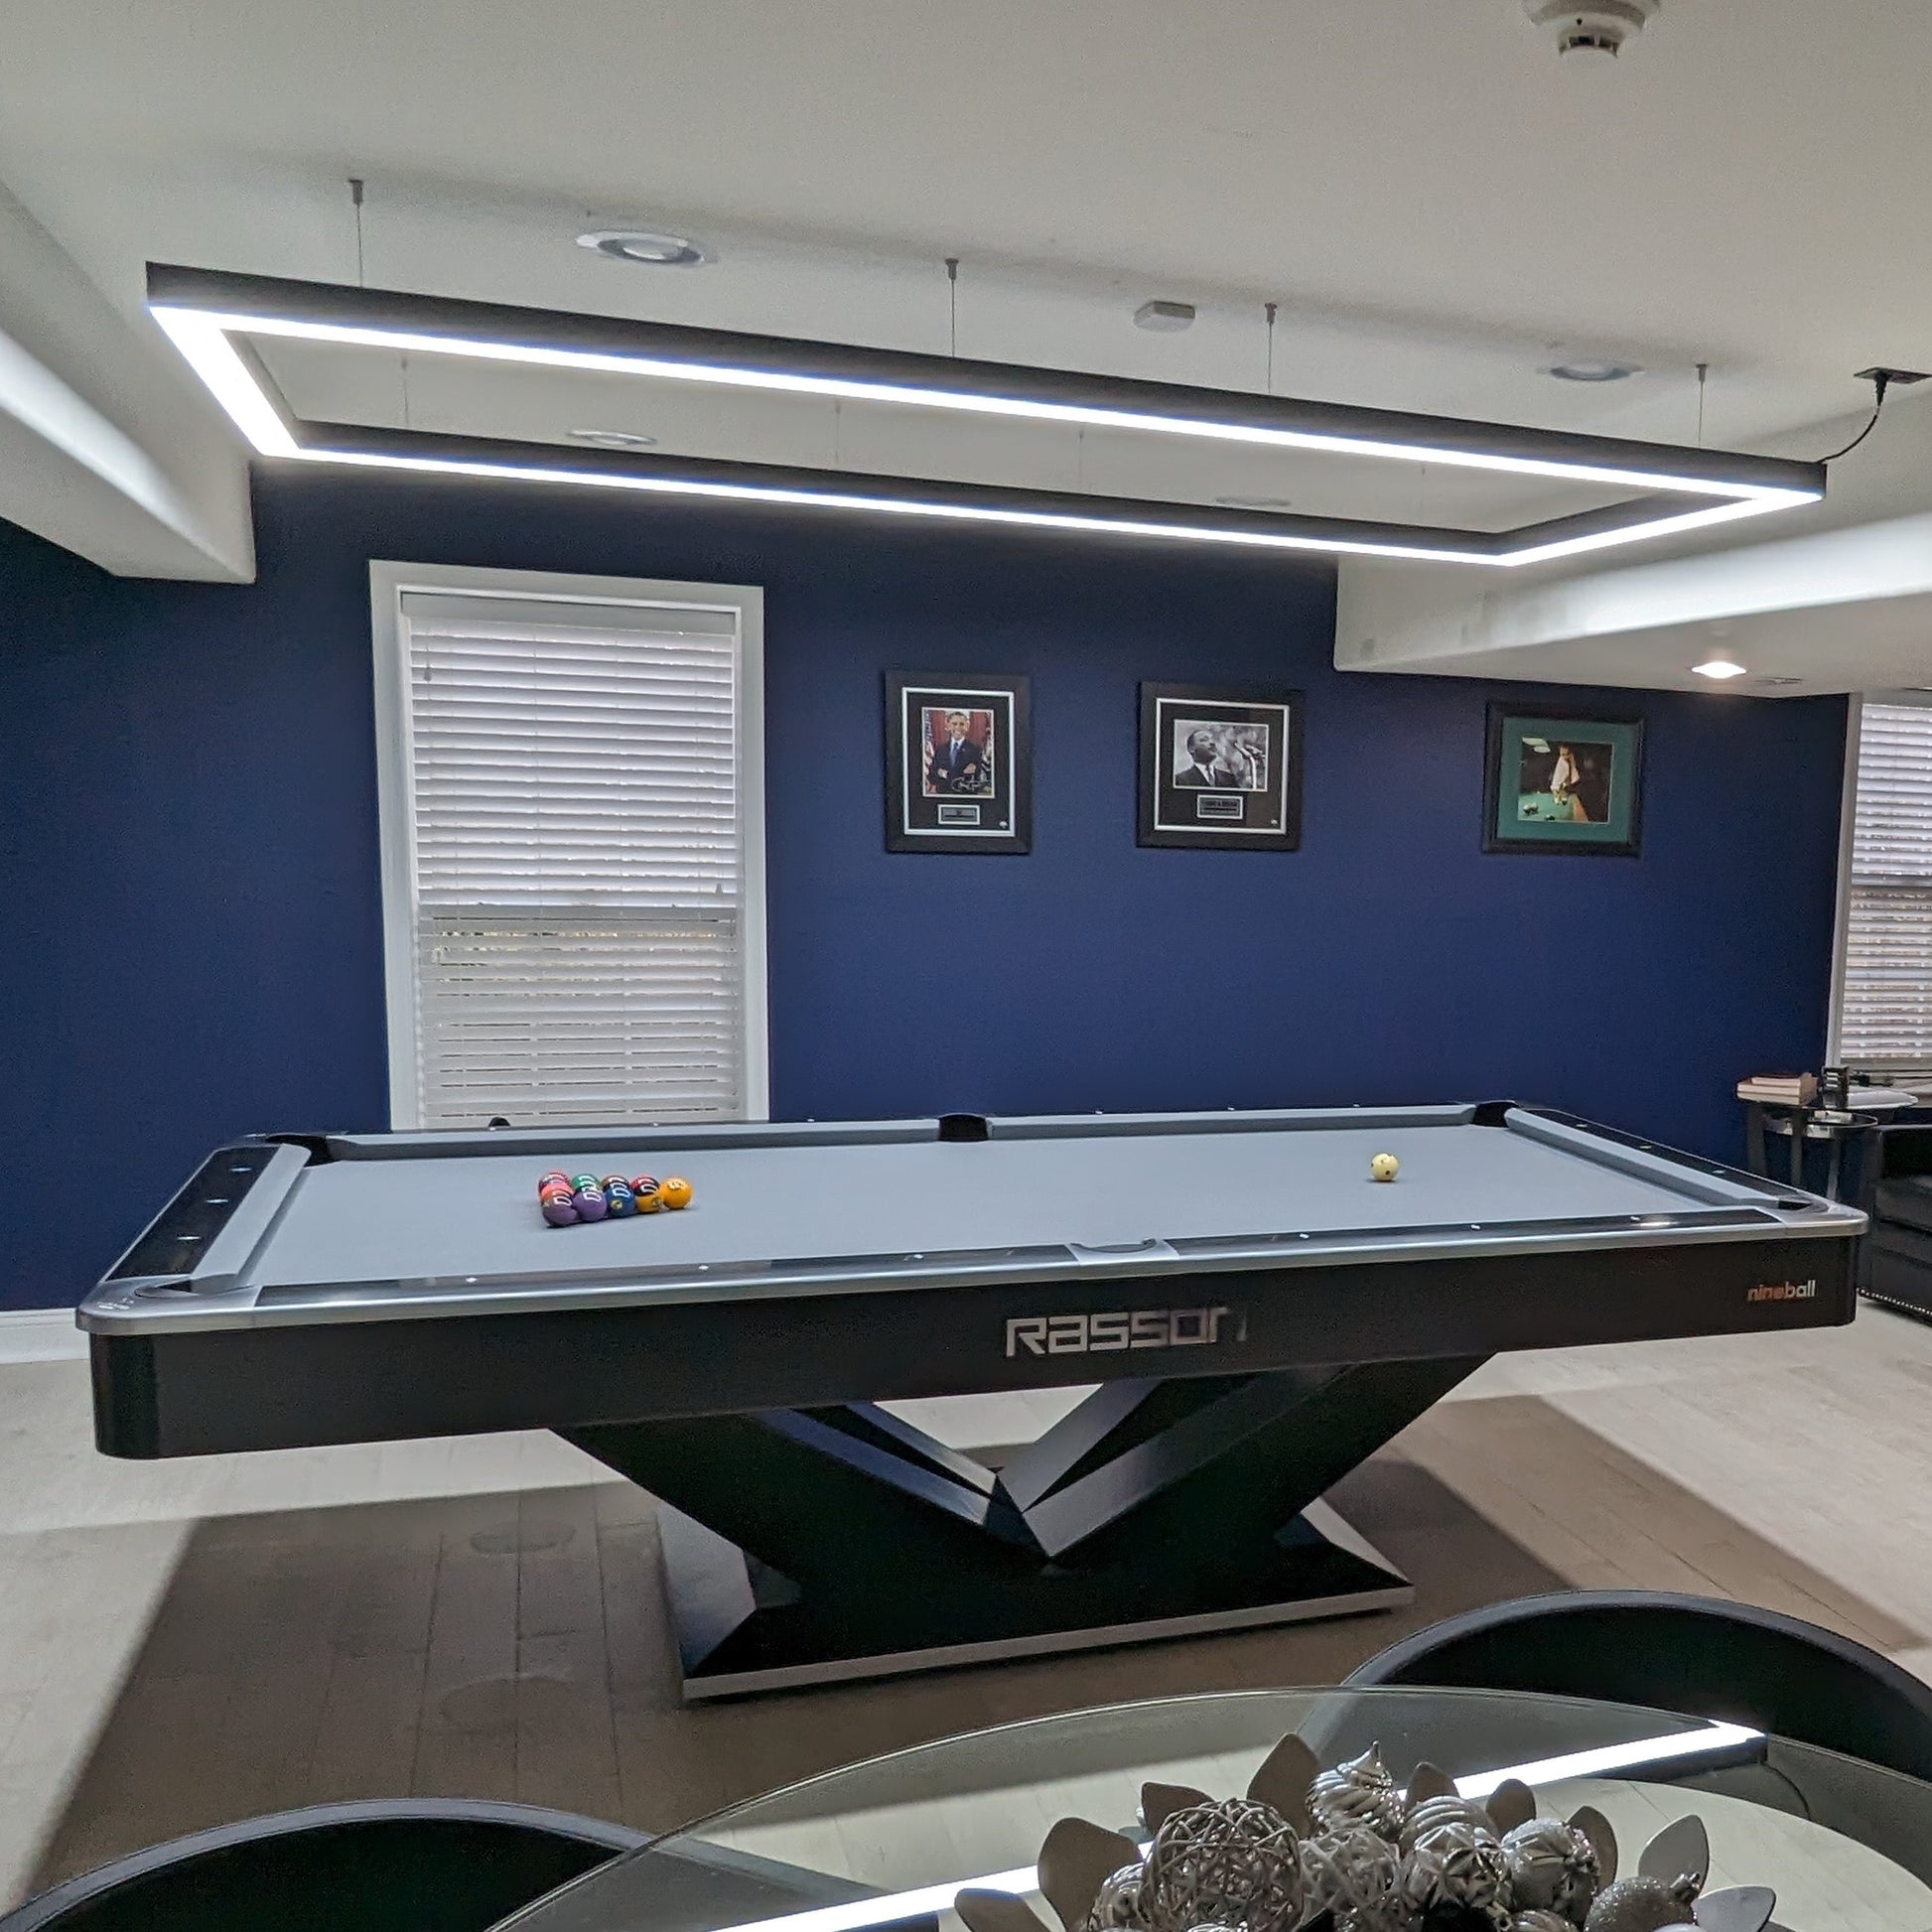 pool table lights installed over rasson table